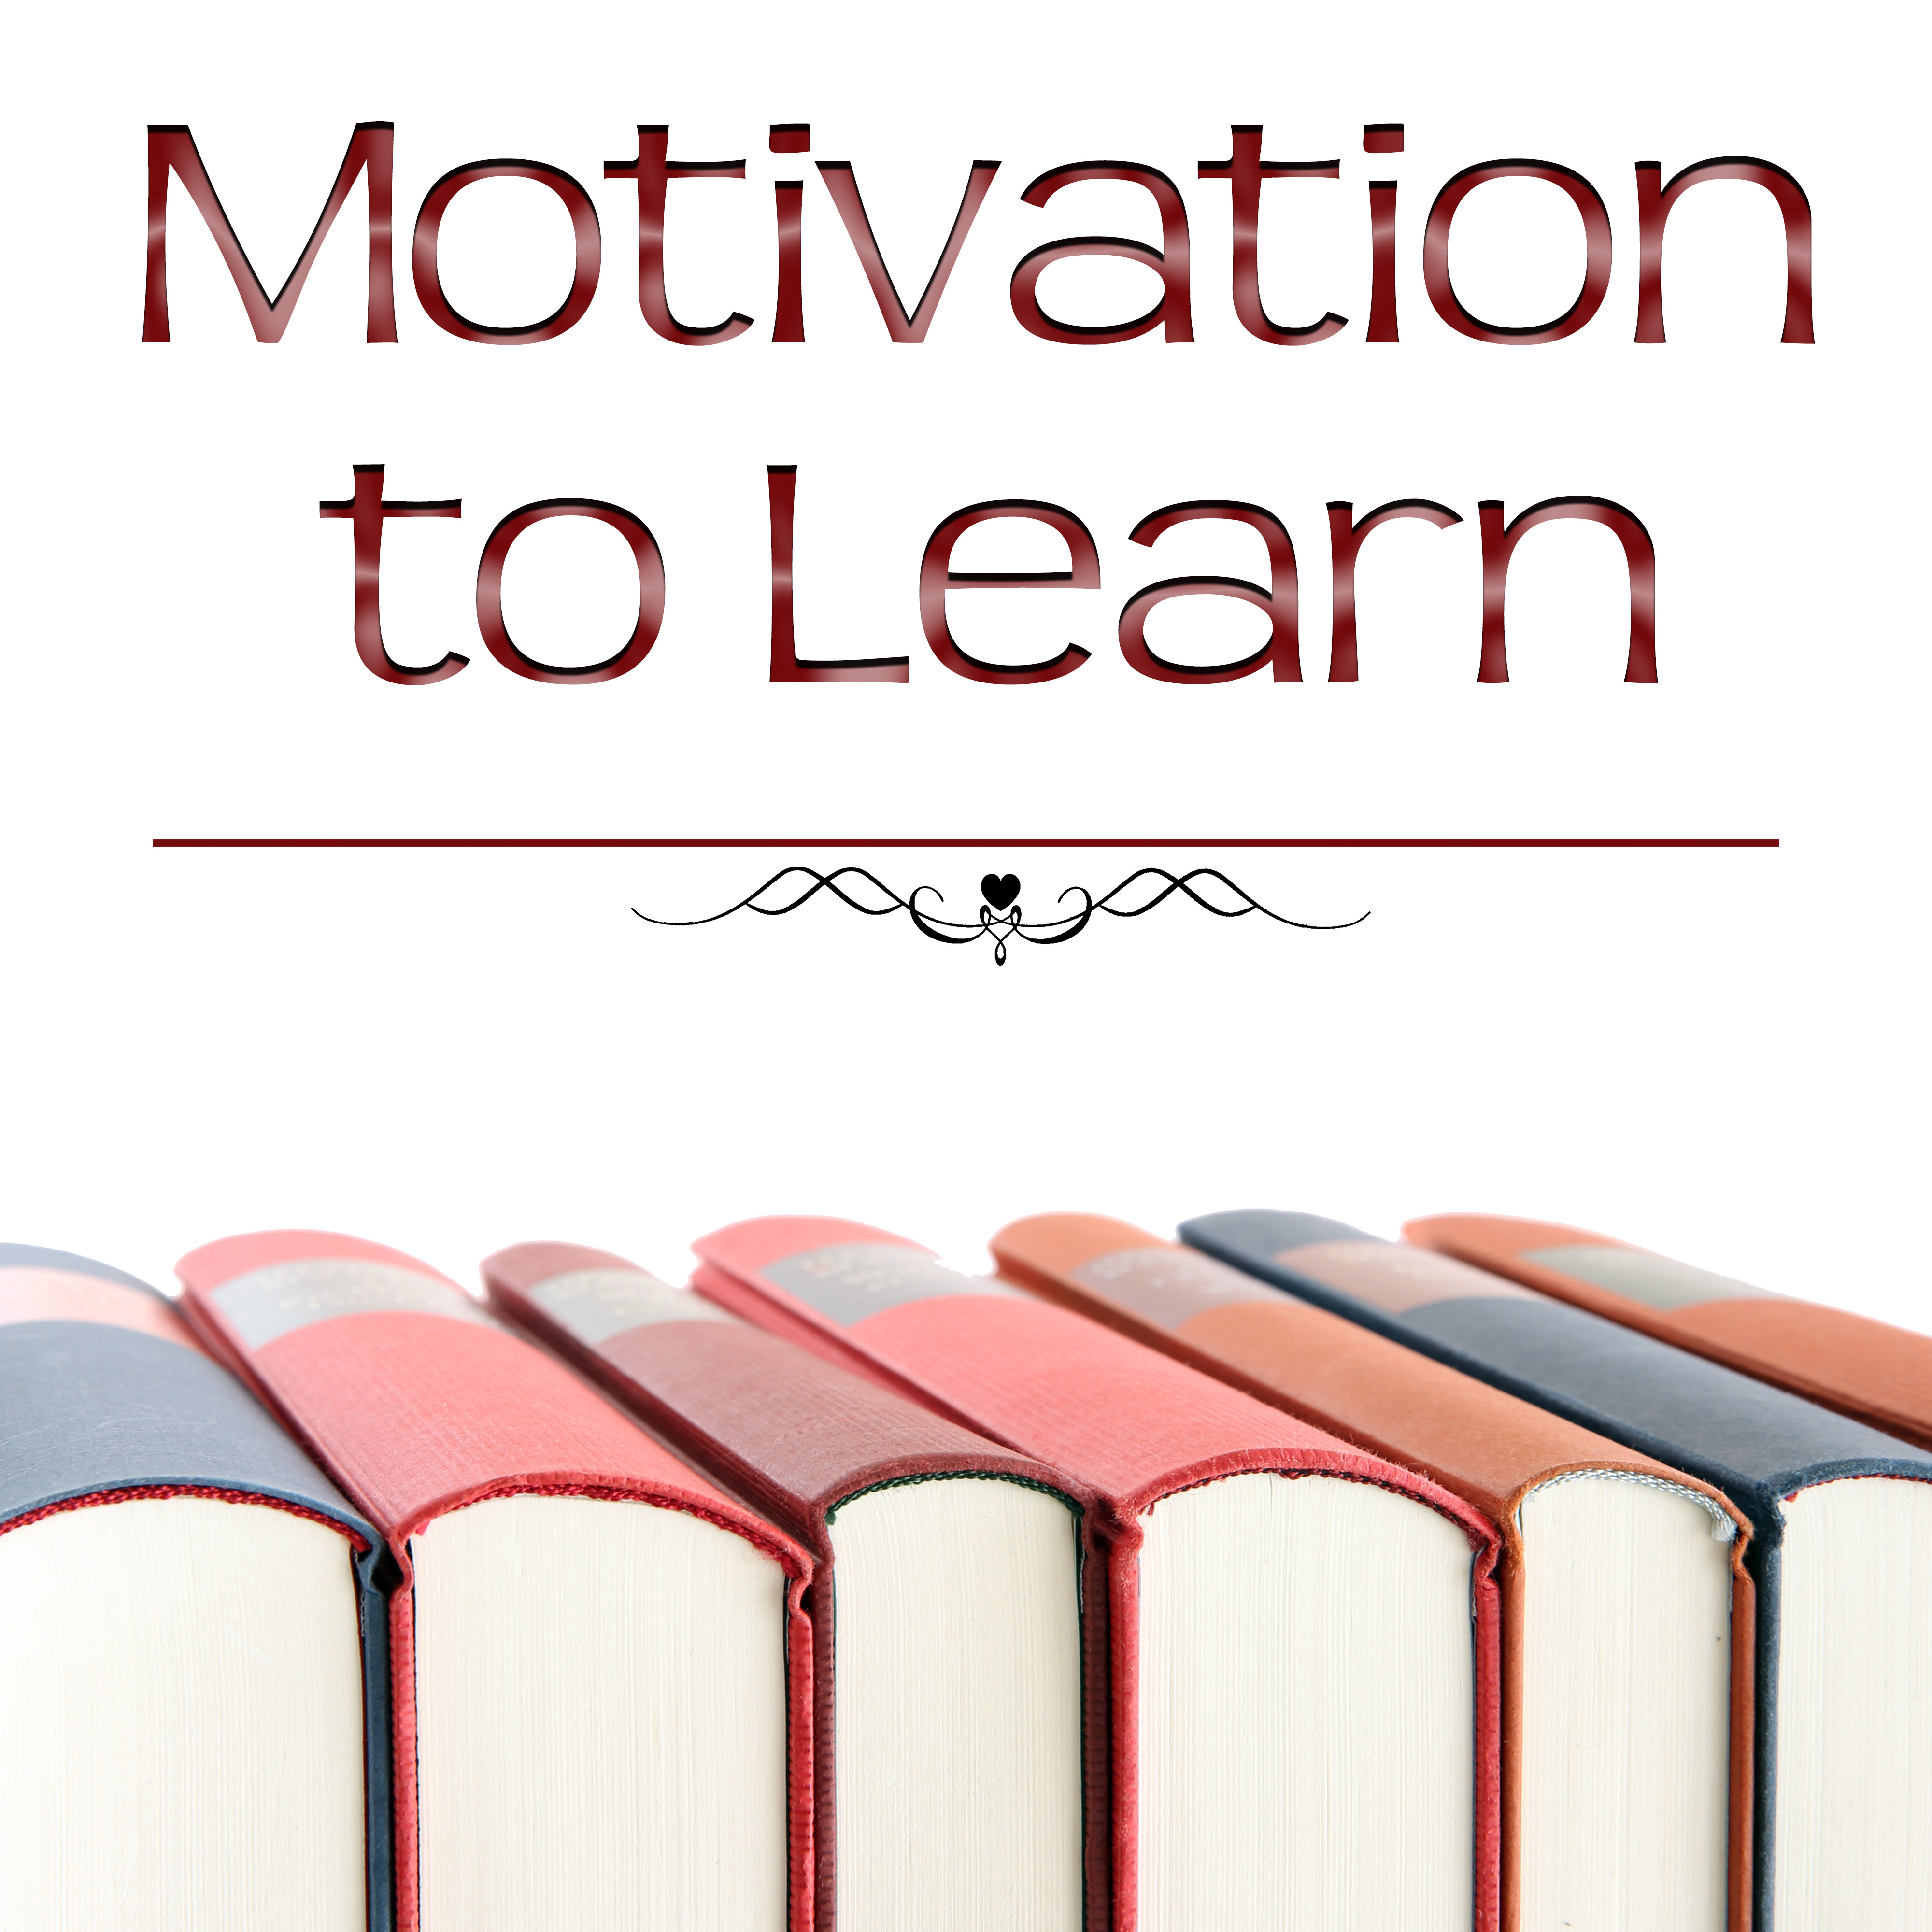 Motivation to Learn  Best Calming Music for Learning, Feel Stronger Motivation to Study, Better Effects, Improve Brain Power, Nature Sounds for Learning, Relaxation, Focus on Task